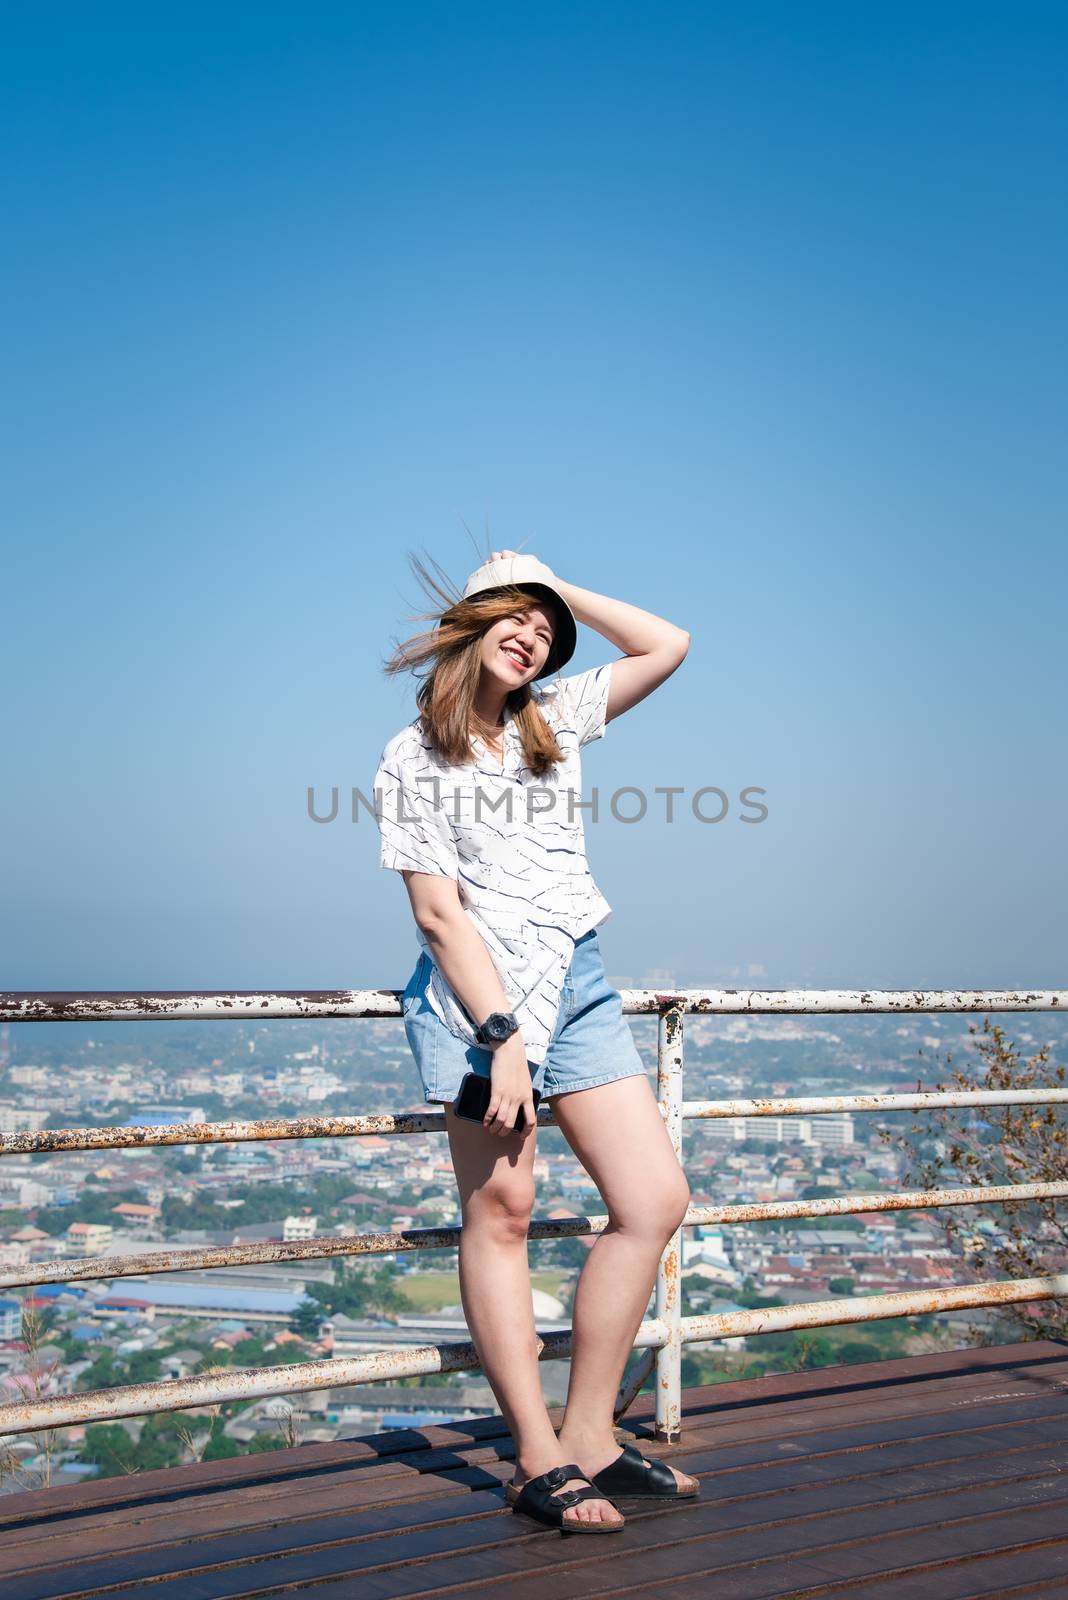 Woman relax at landscape viewpoint on mountain by PongMoji